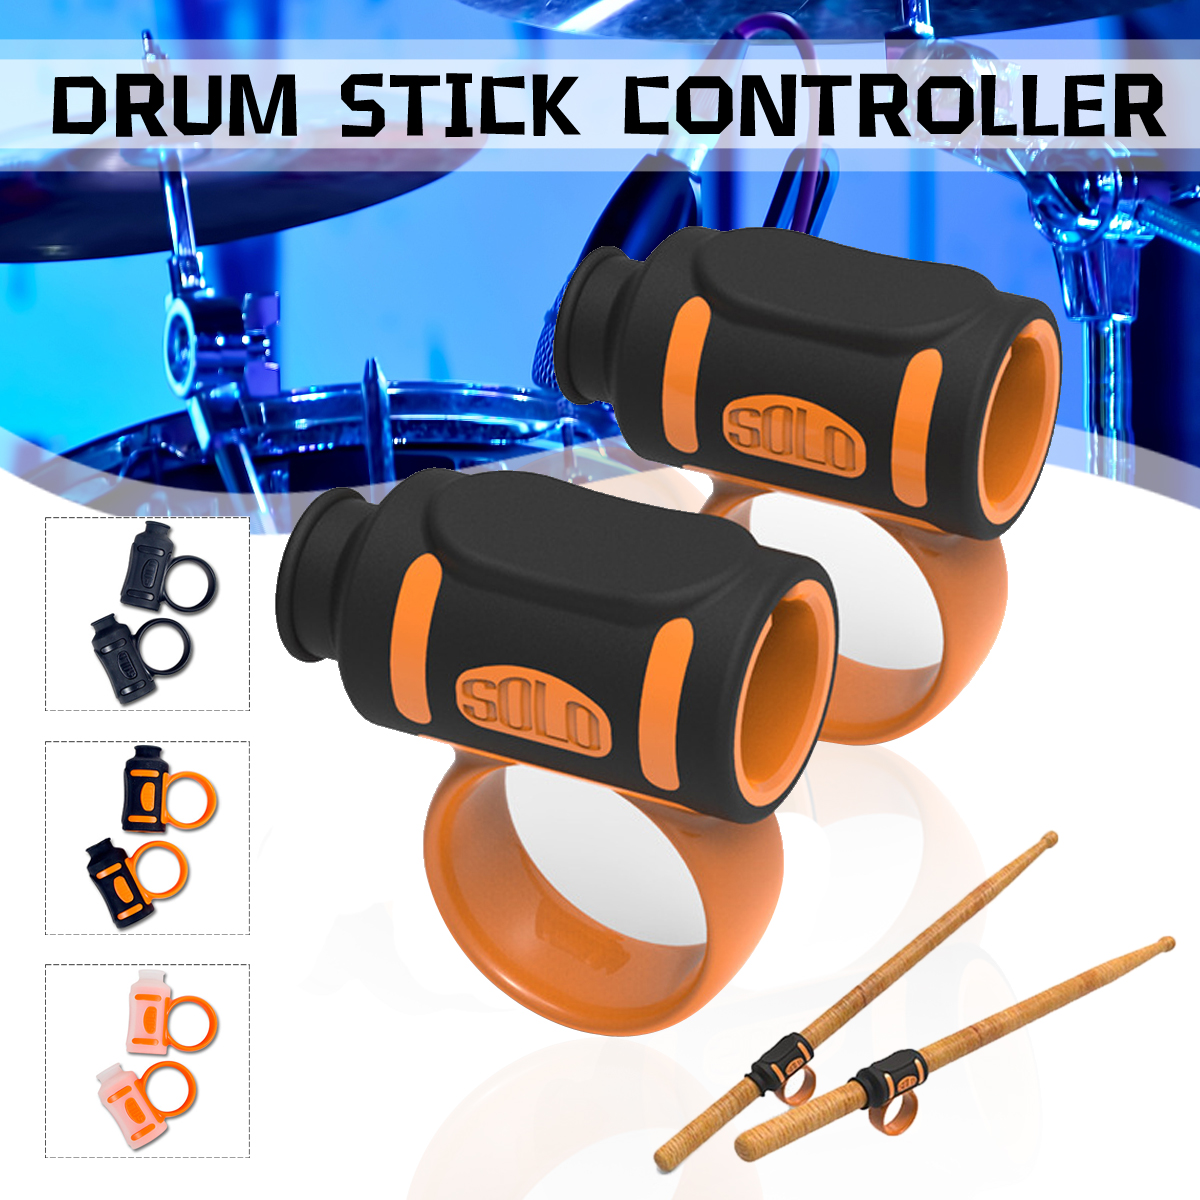 SOLO 2pcs Drum Stick Drumstick Control Controller Clips Grip for Beginner Percussion Musical Instrument Parts Accessories